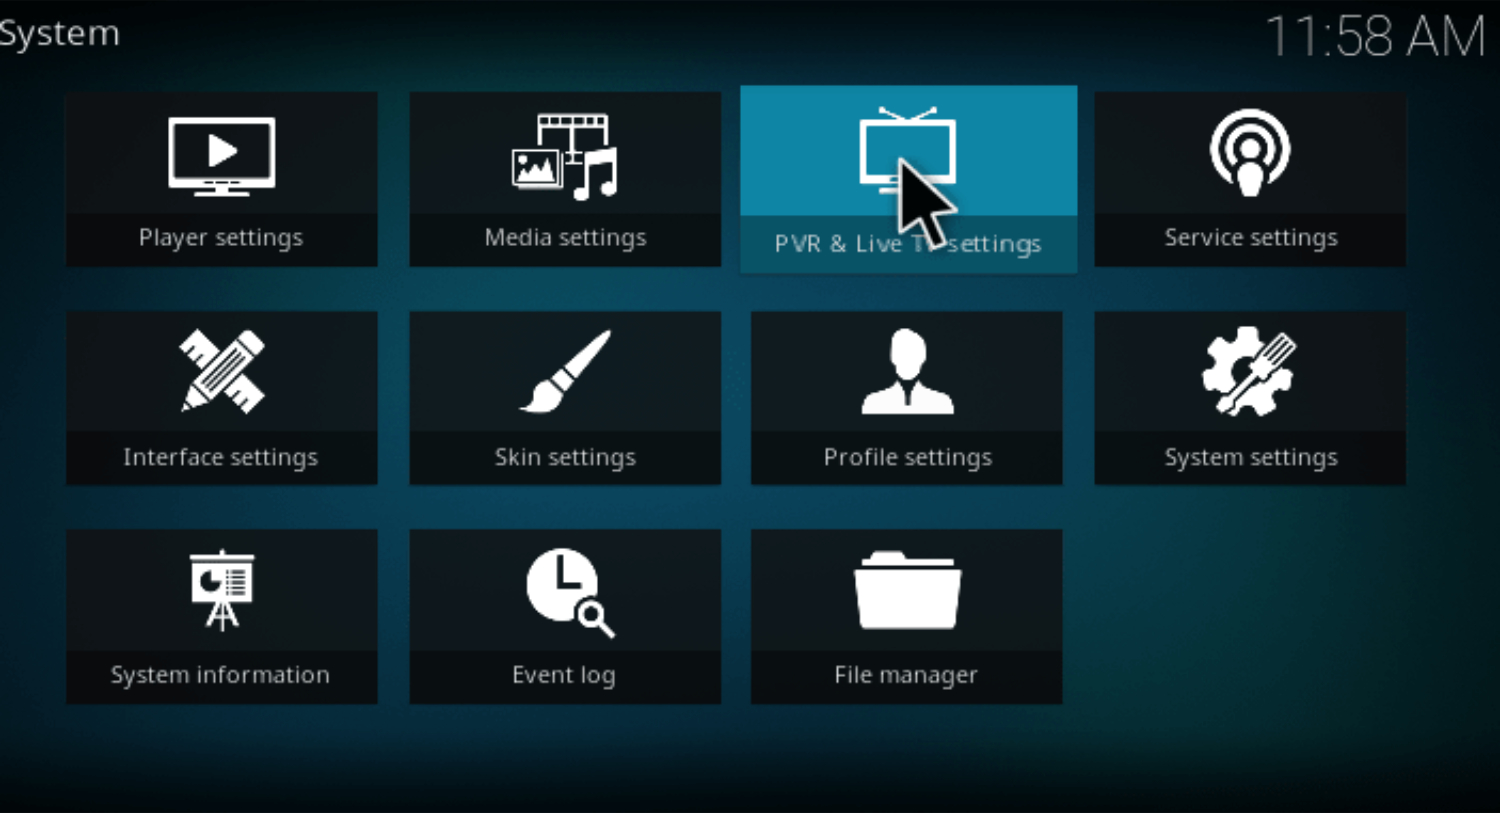 pvr and live tv settings